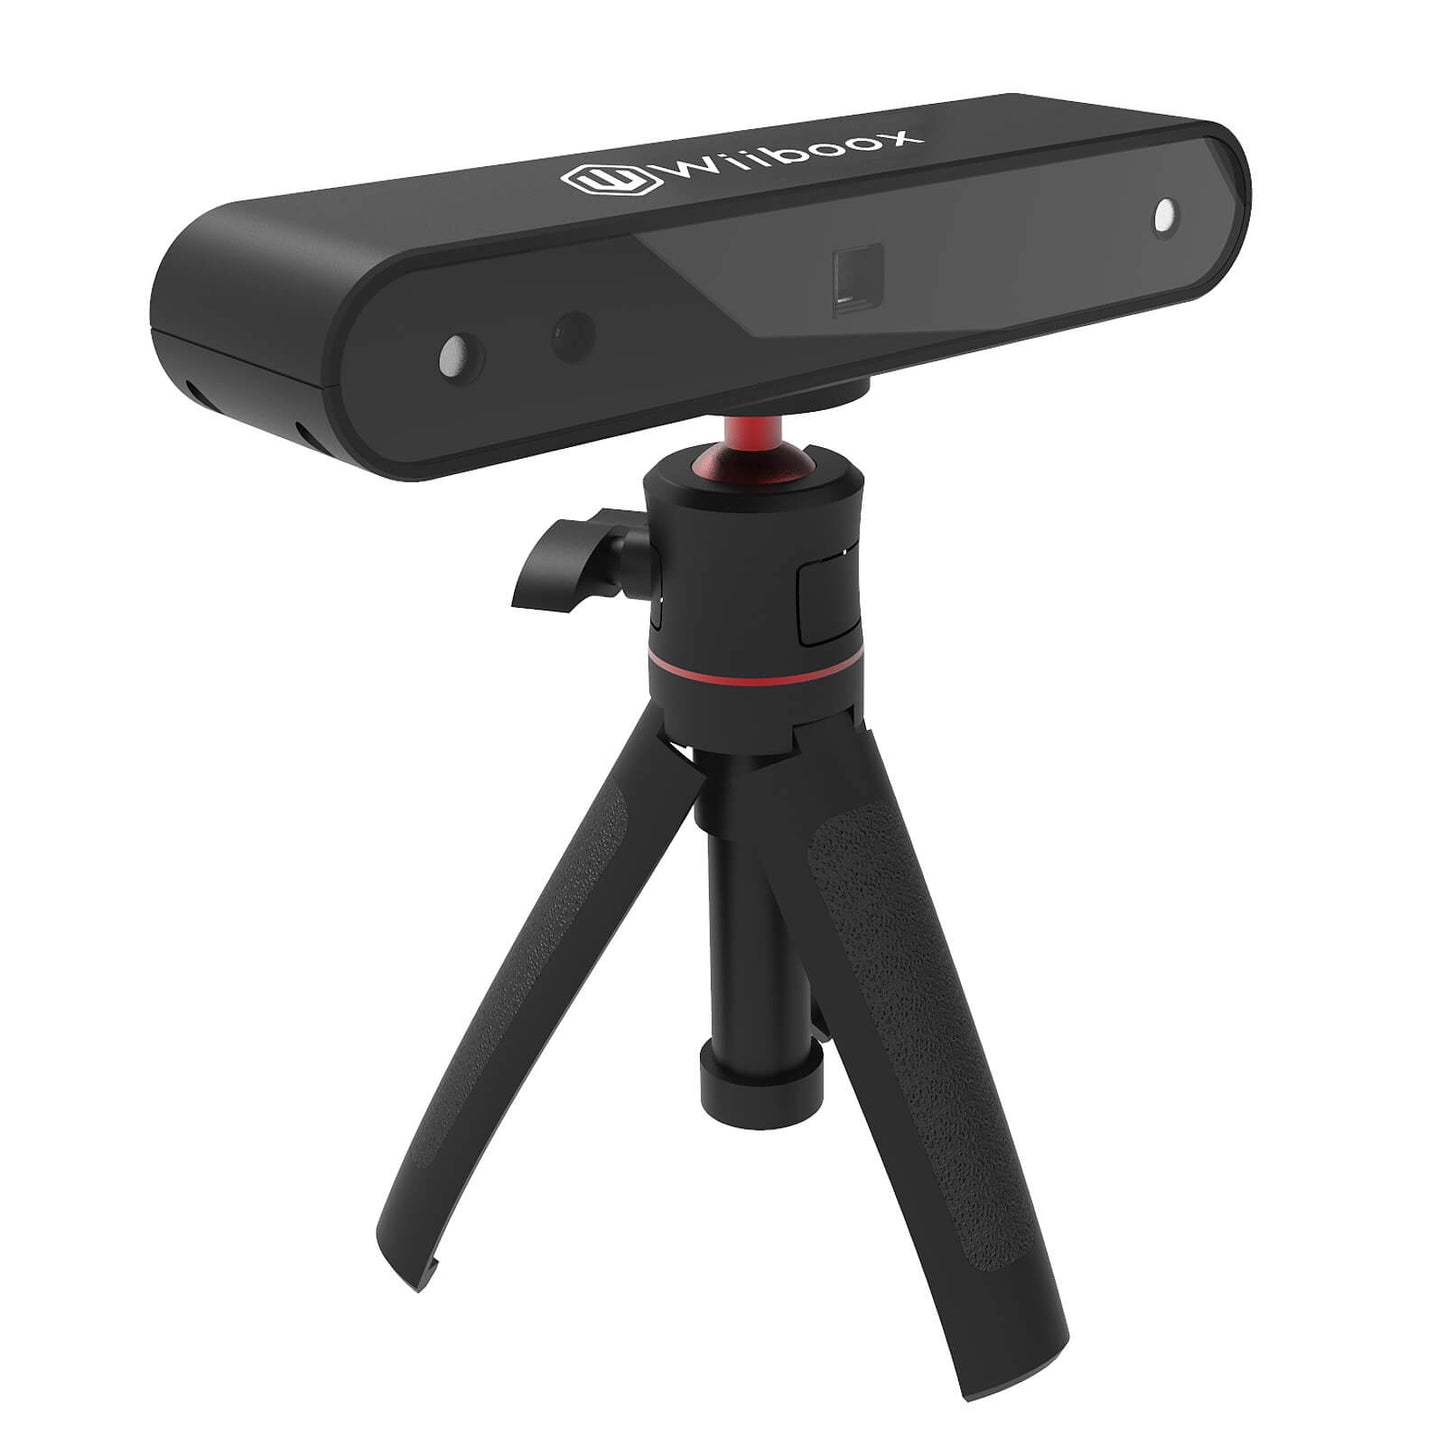 Wiiboox Portable High-precision 3D Scanner [Free Shipping]